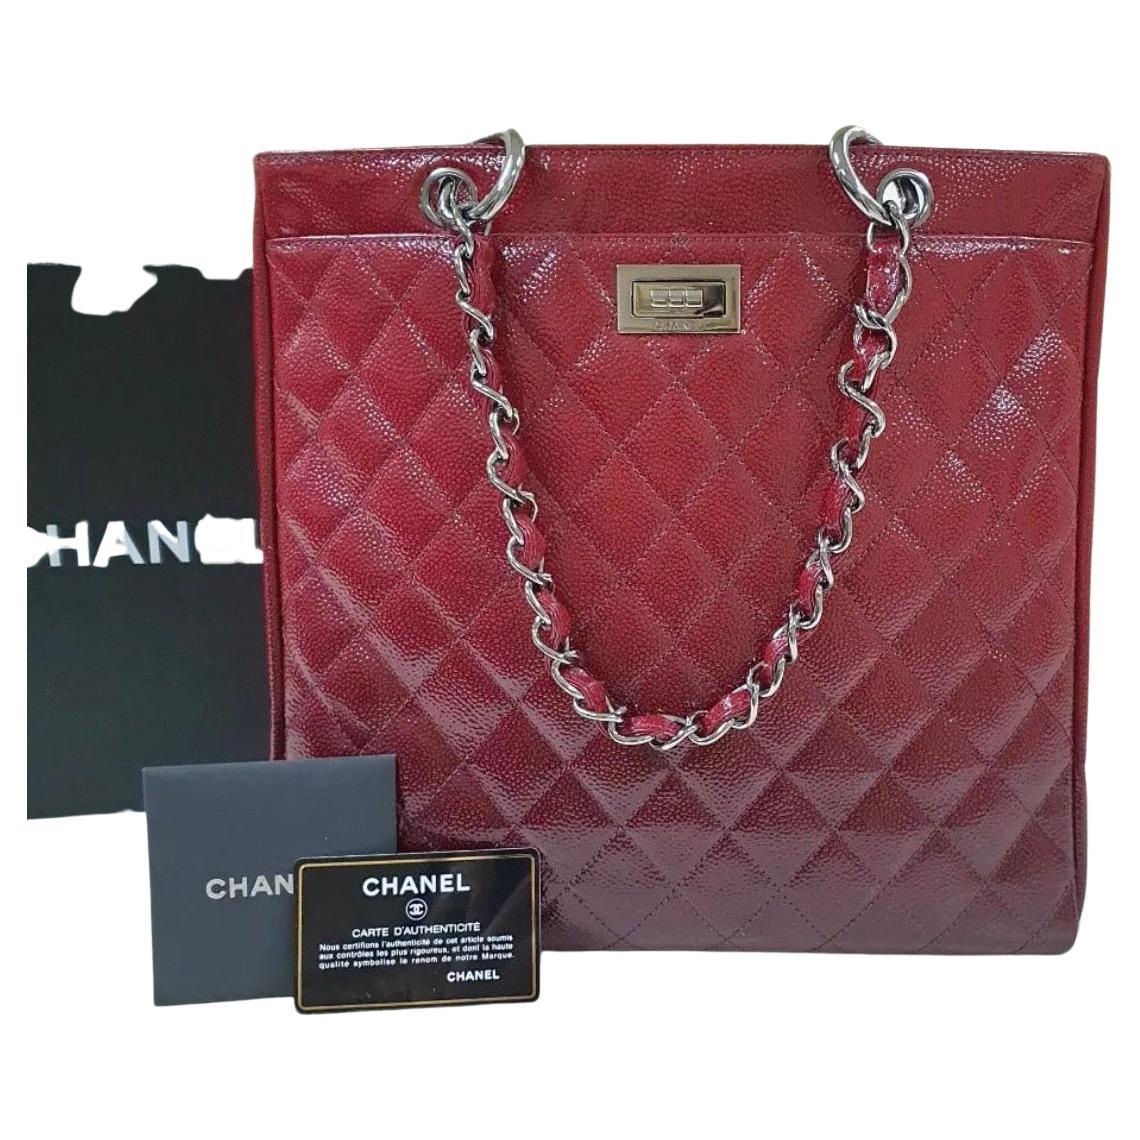 Chanel Burgundy Ombré Quilted Patent Grained Leather 2.55 Reissue Bag